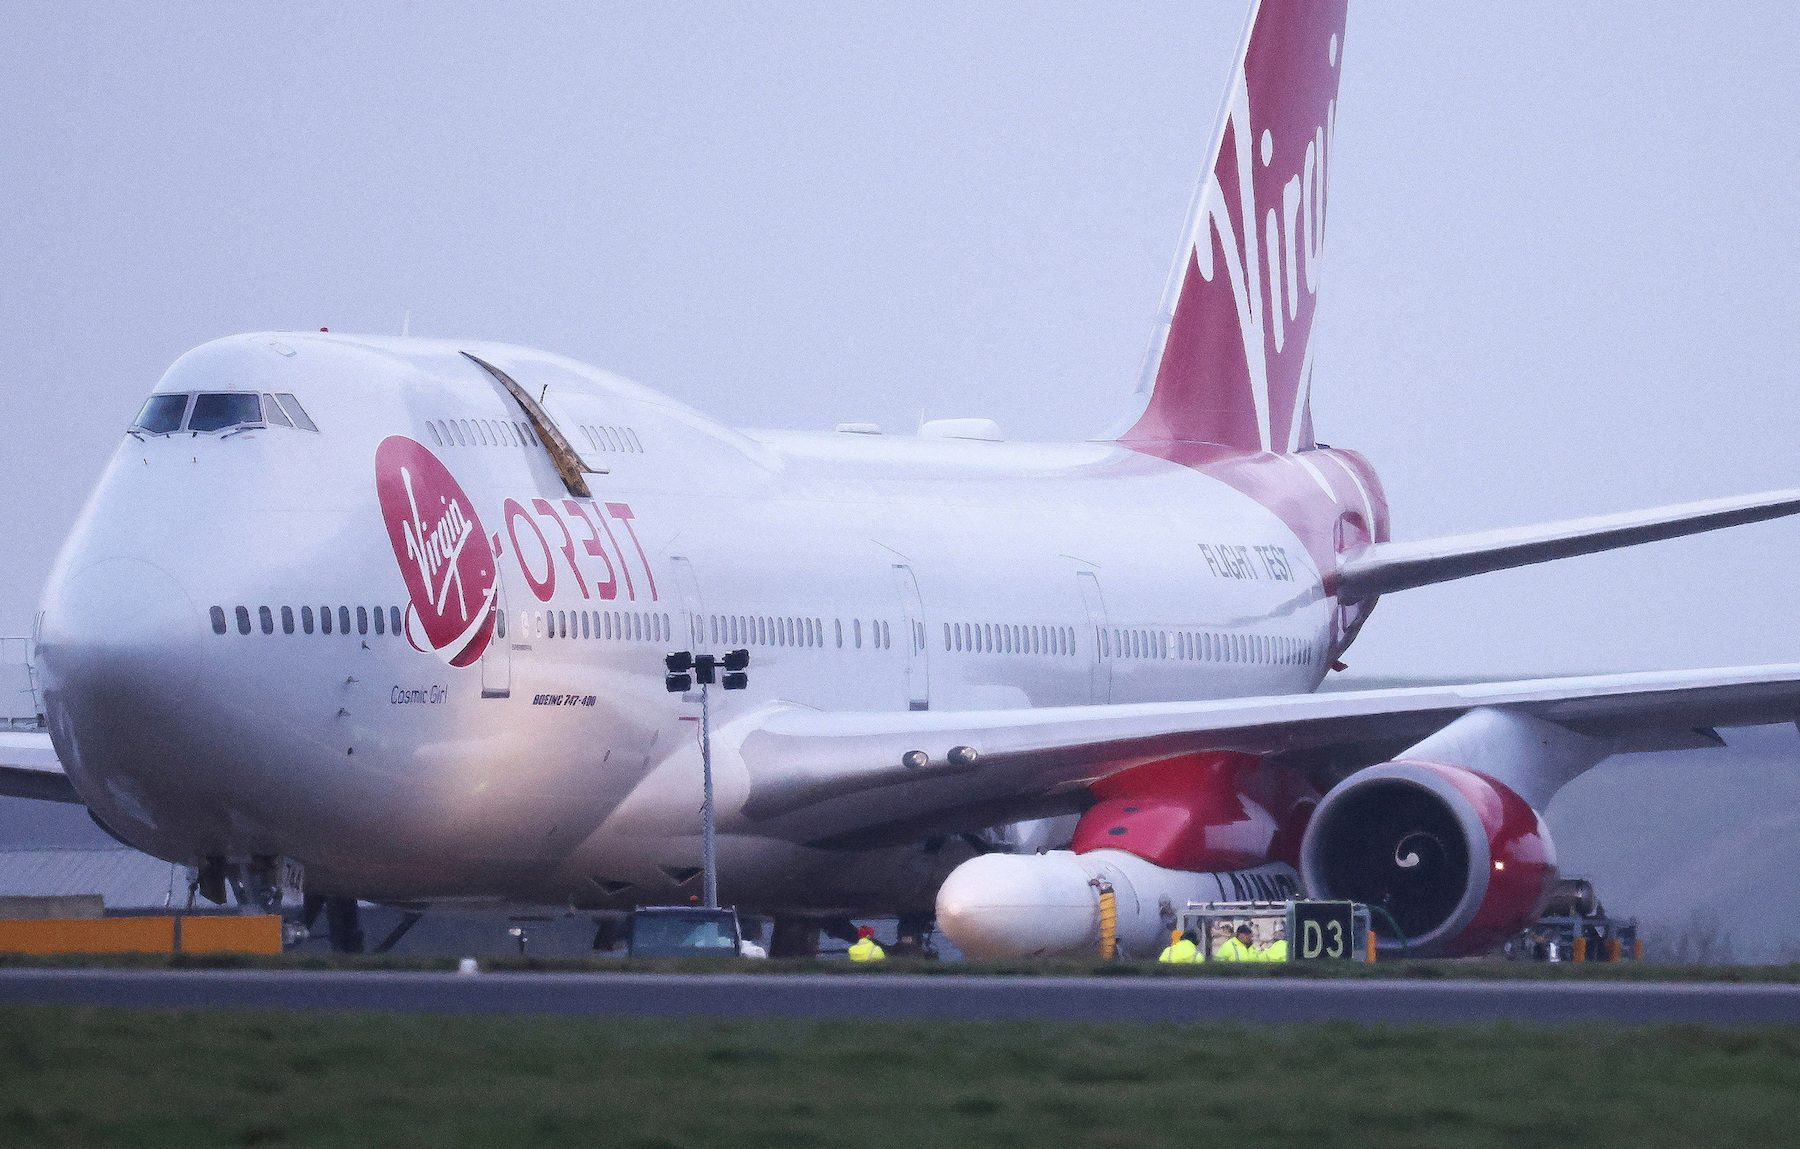 Branson’s Virgin Orbit files for bankruptcy after launch failure squeezed finances